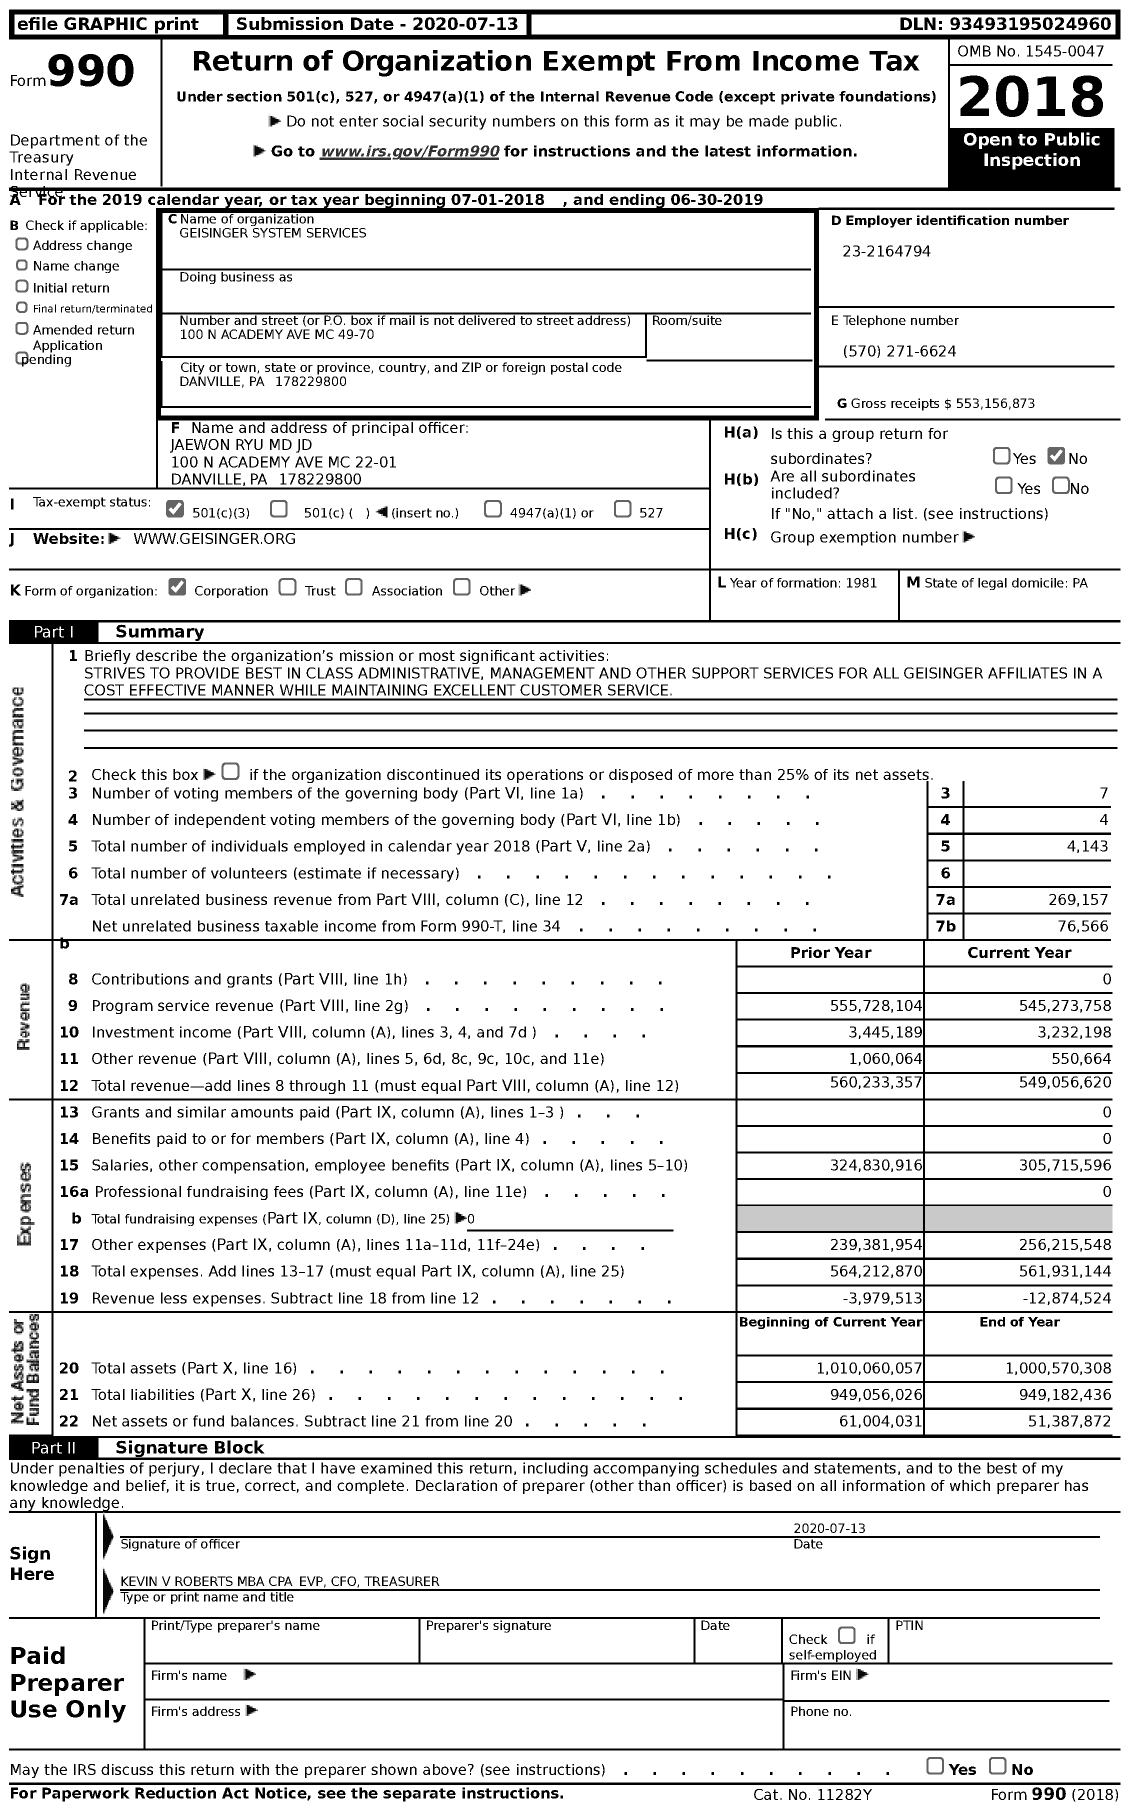 Image of first page of 2018 Form 990 for Geisinger System Services (GHS)